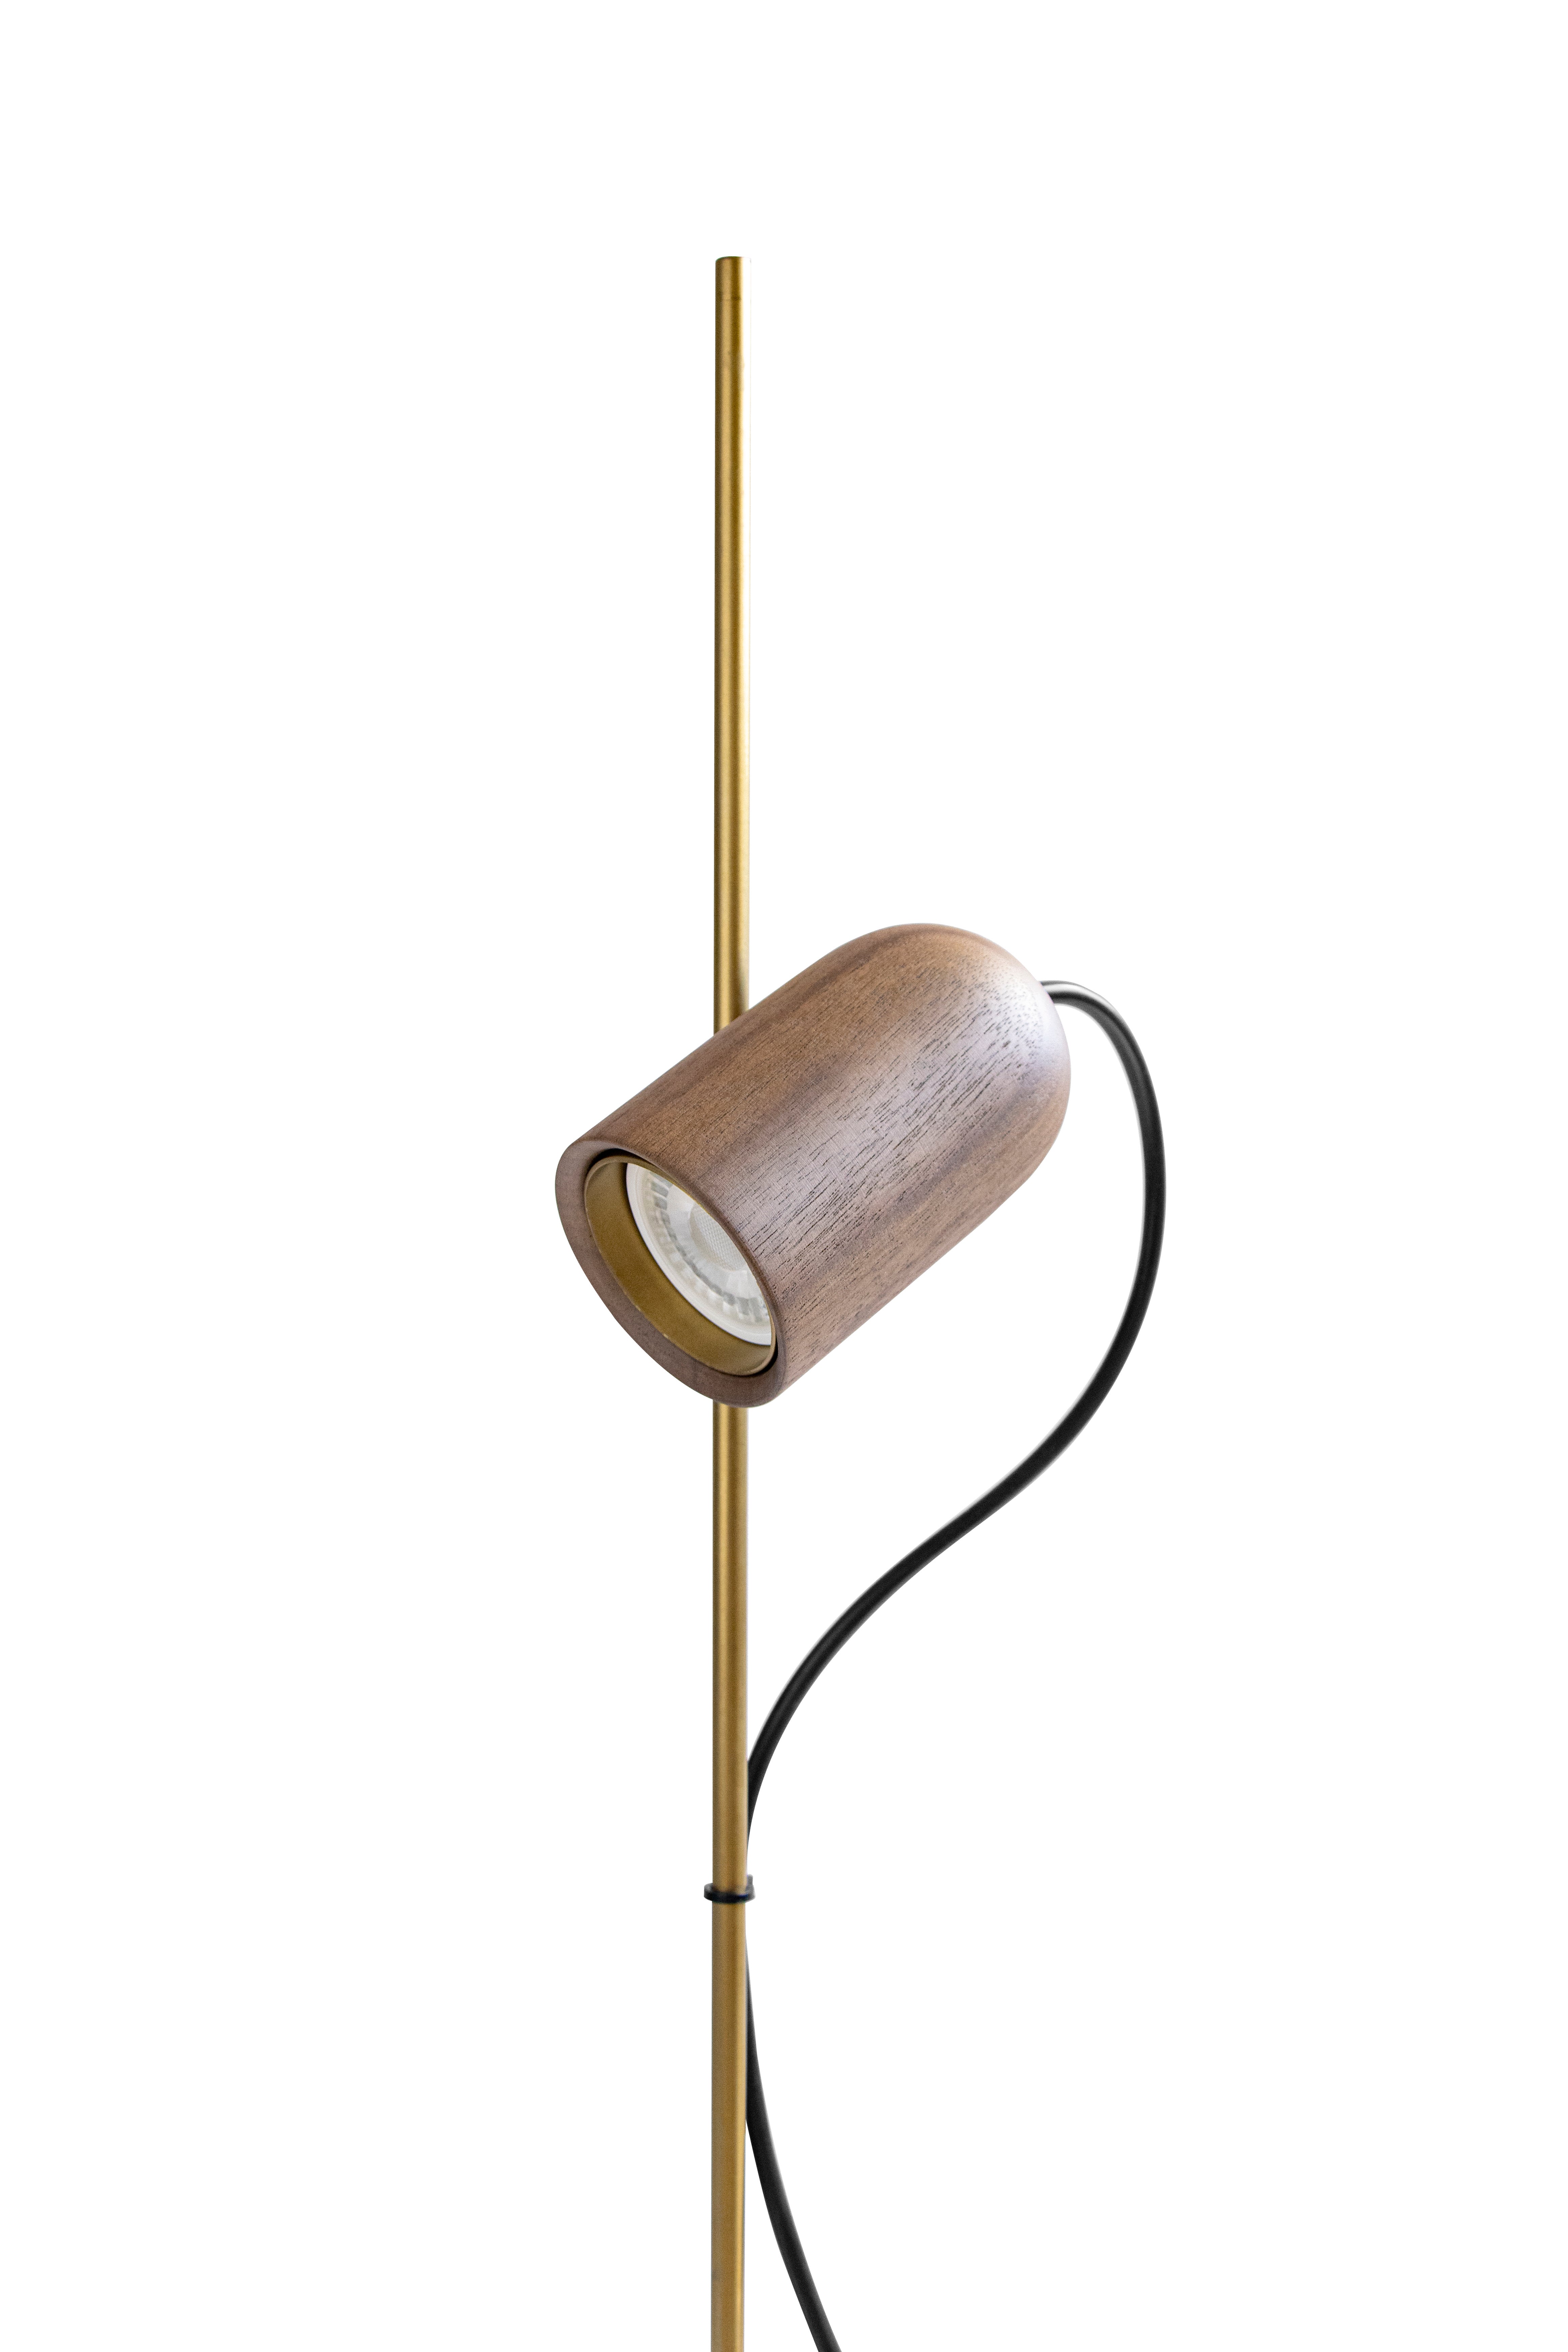 Nomon incorporates to the collection of lighting a new family, Onfa. We can find it in several versions: table, floor and pendant. A design that offers elegance and simplicity. It combines a metal body in brass or graphite finish with focus and base